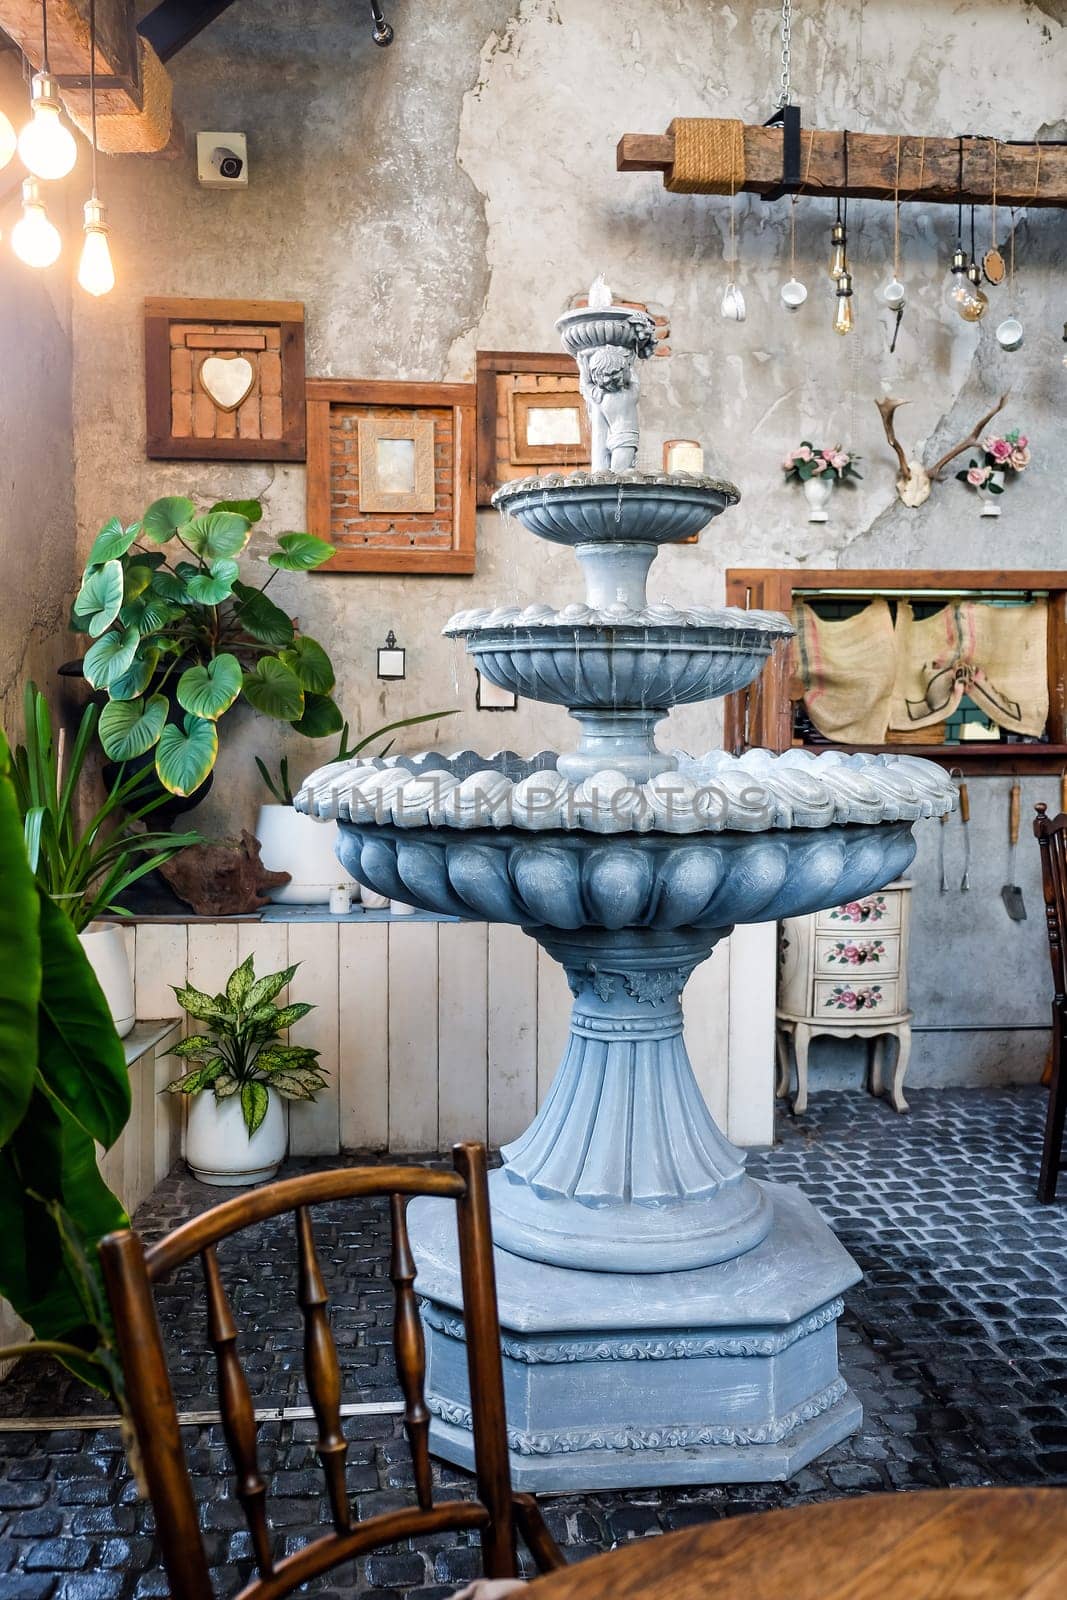 Fountain in the interior of a Vintage Dining Room The concept of rest and relaxation.